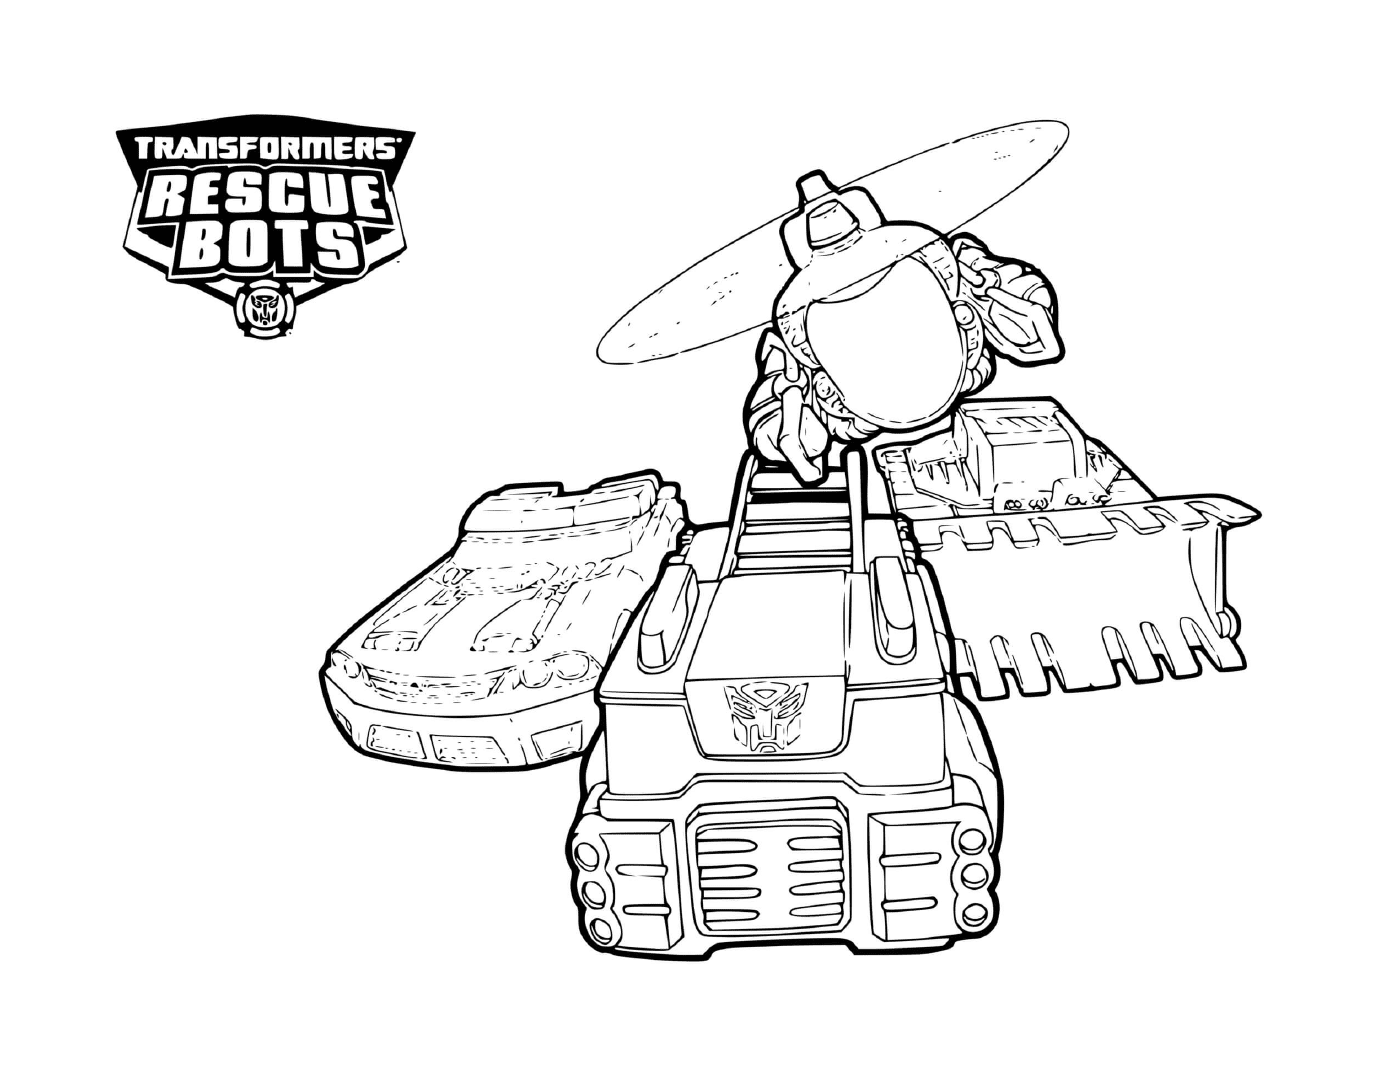  Transformers Rescue Bots, helicopter tank 